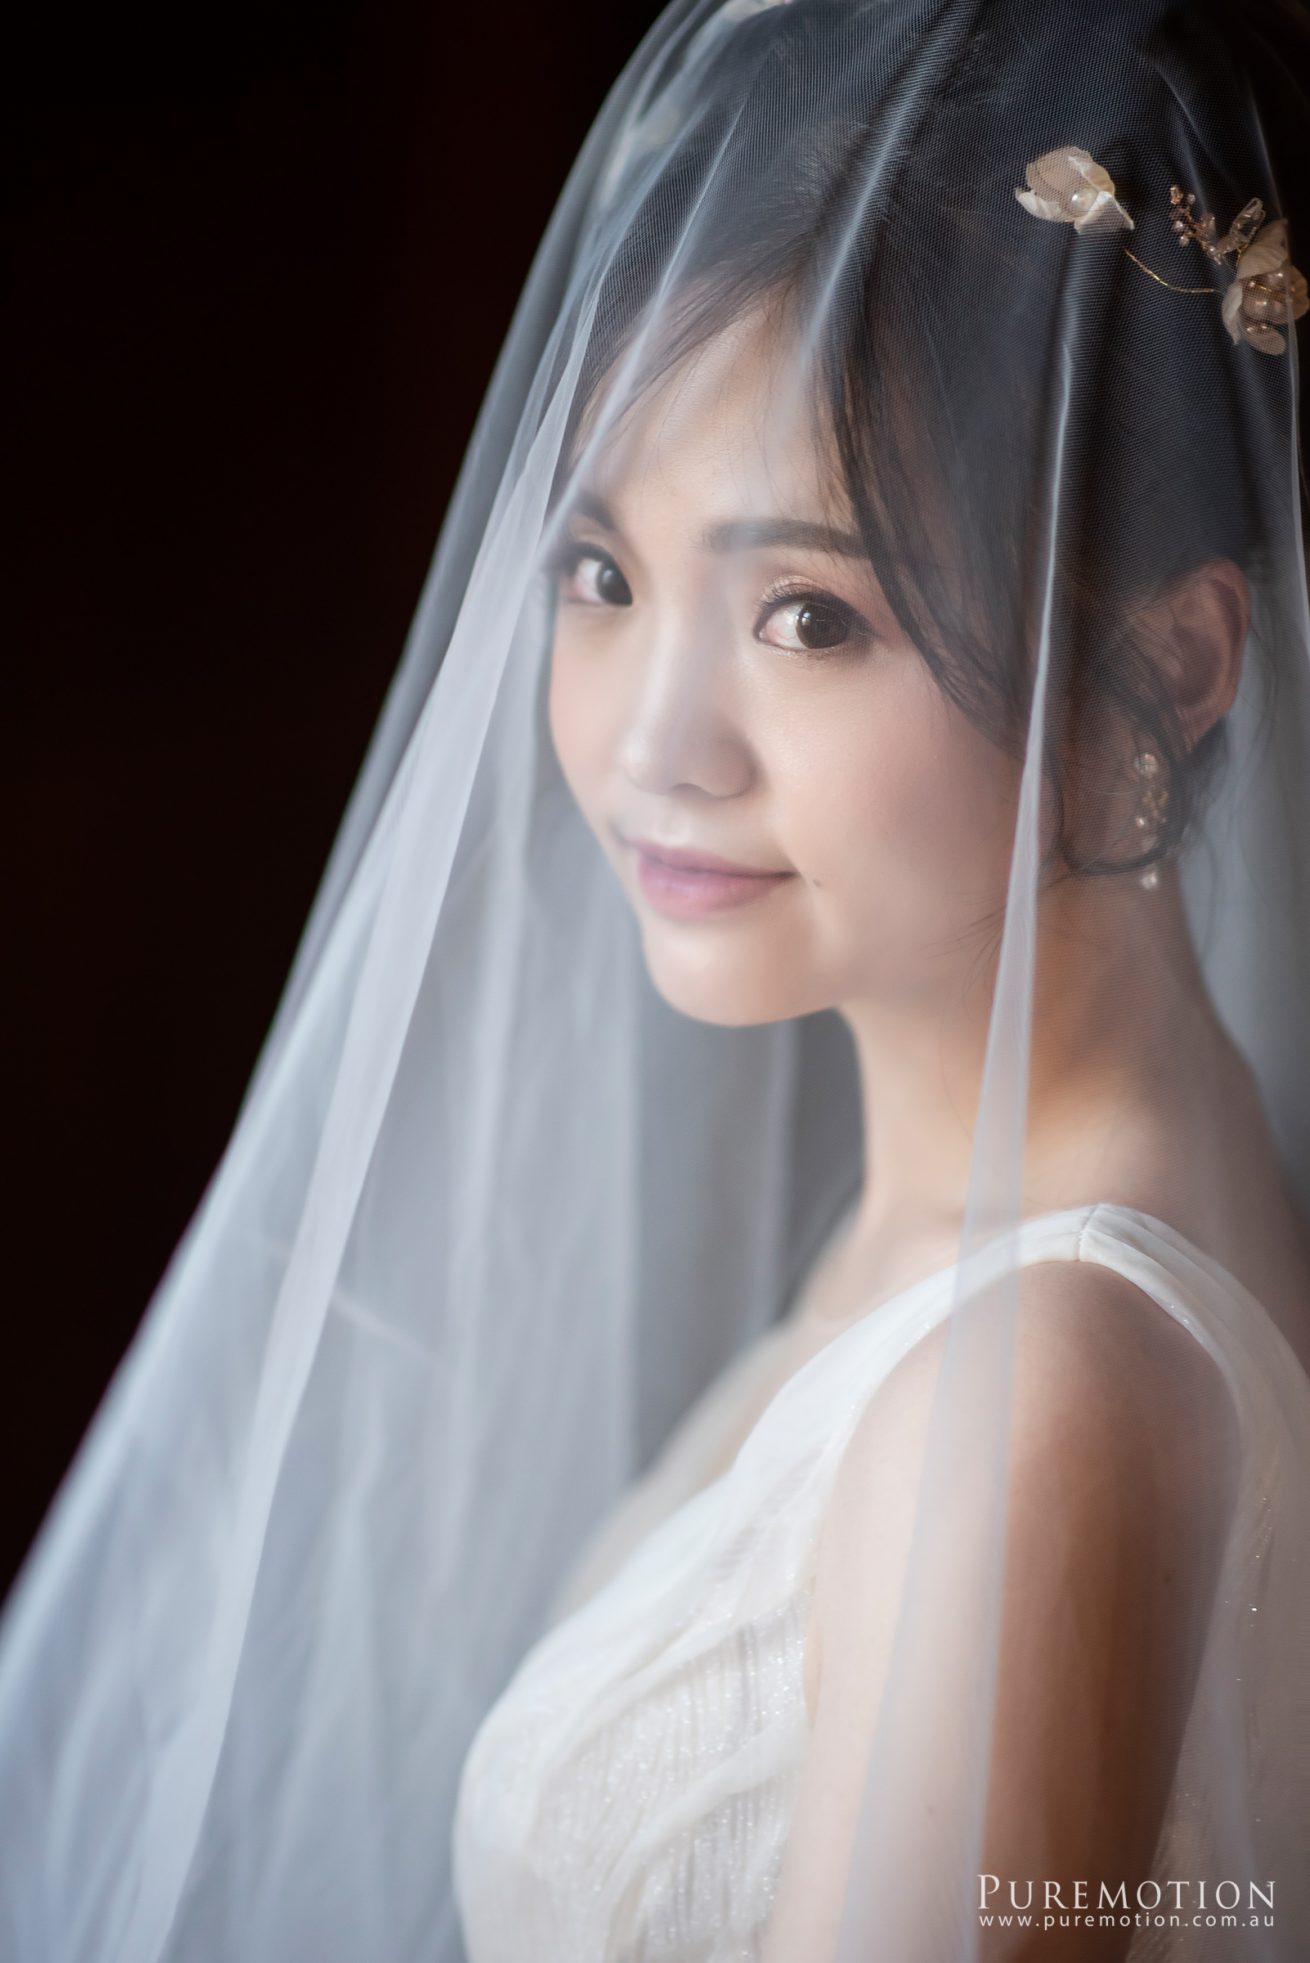 190323 Puremotion Wedding Photography Kooroomba Lavender Alex Huang ArielRico_Edited-0025